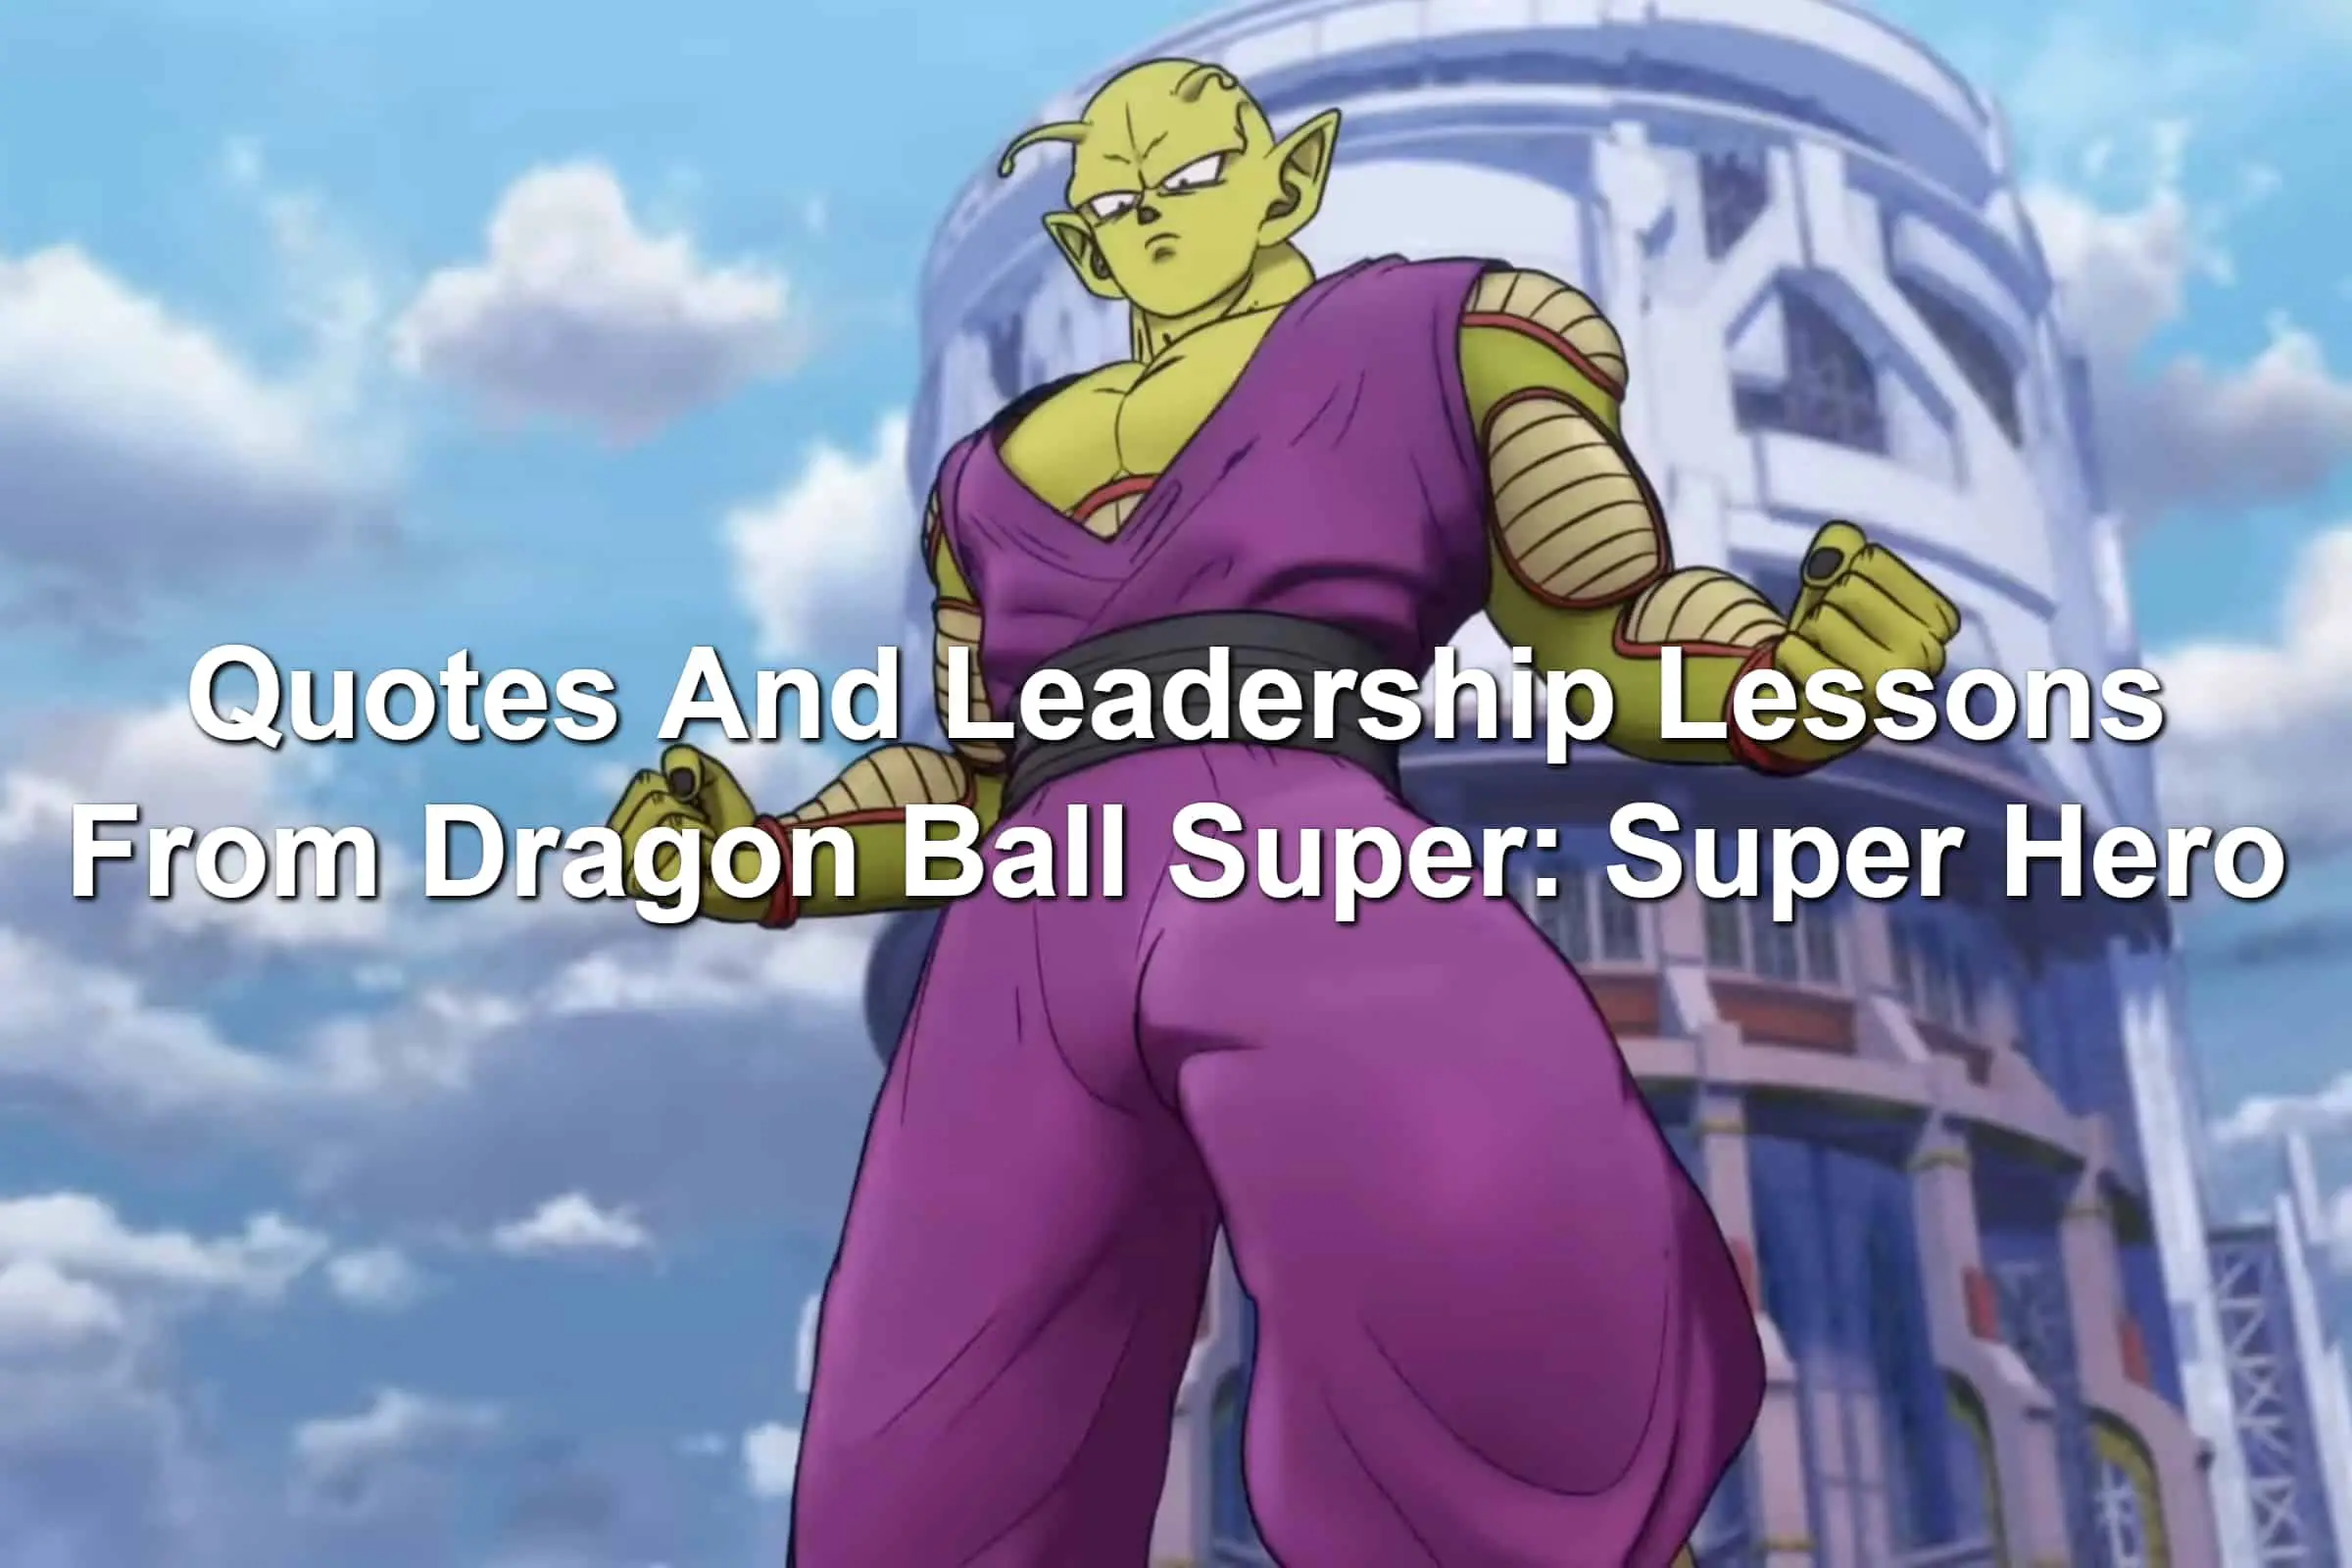 Piccolo standing in front of a tower in Dragon Ball Super: Super Hero